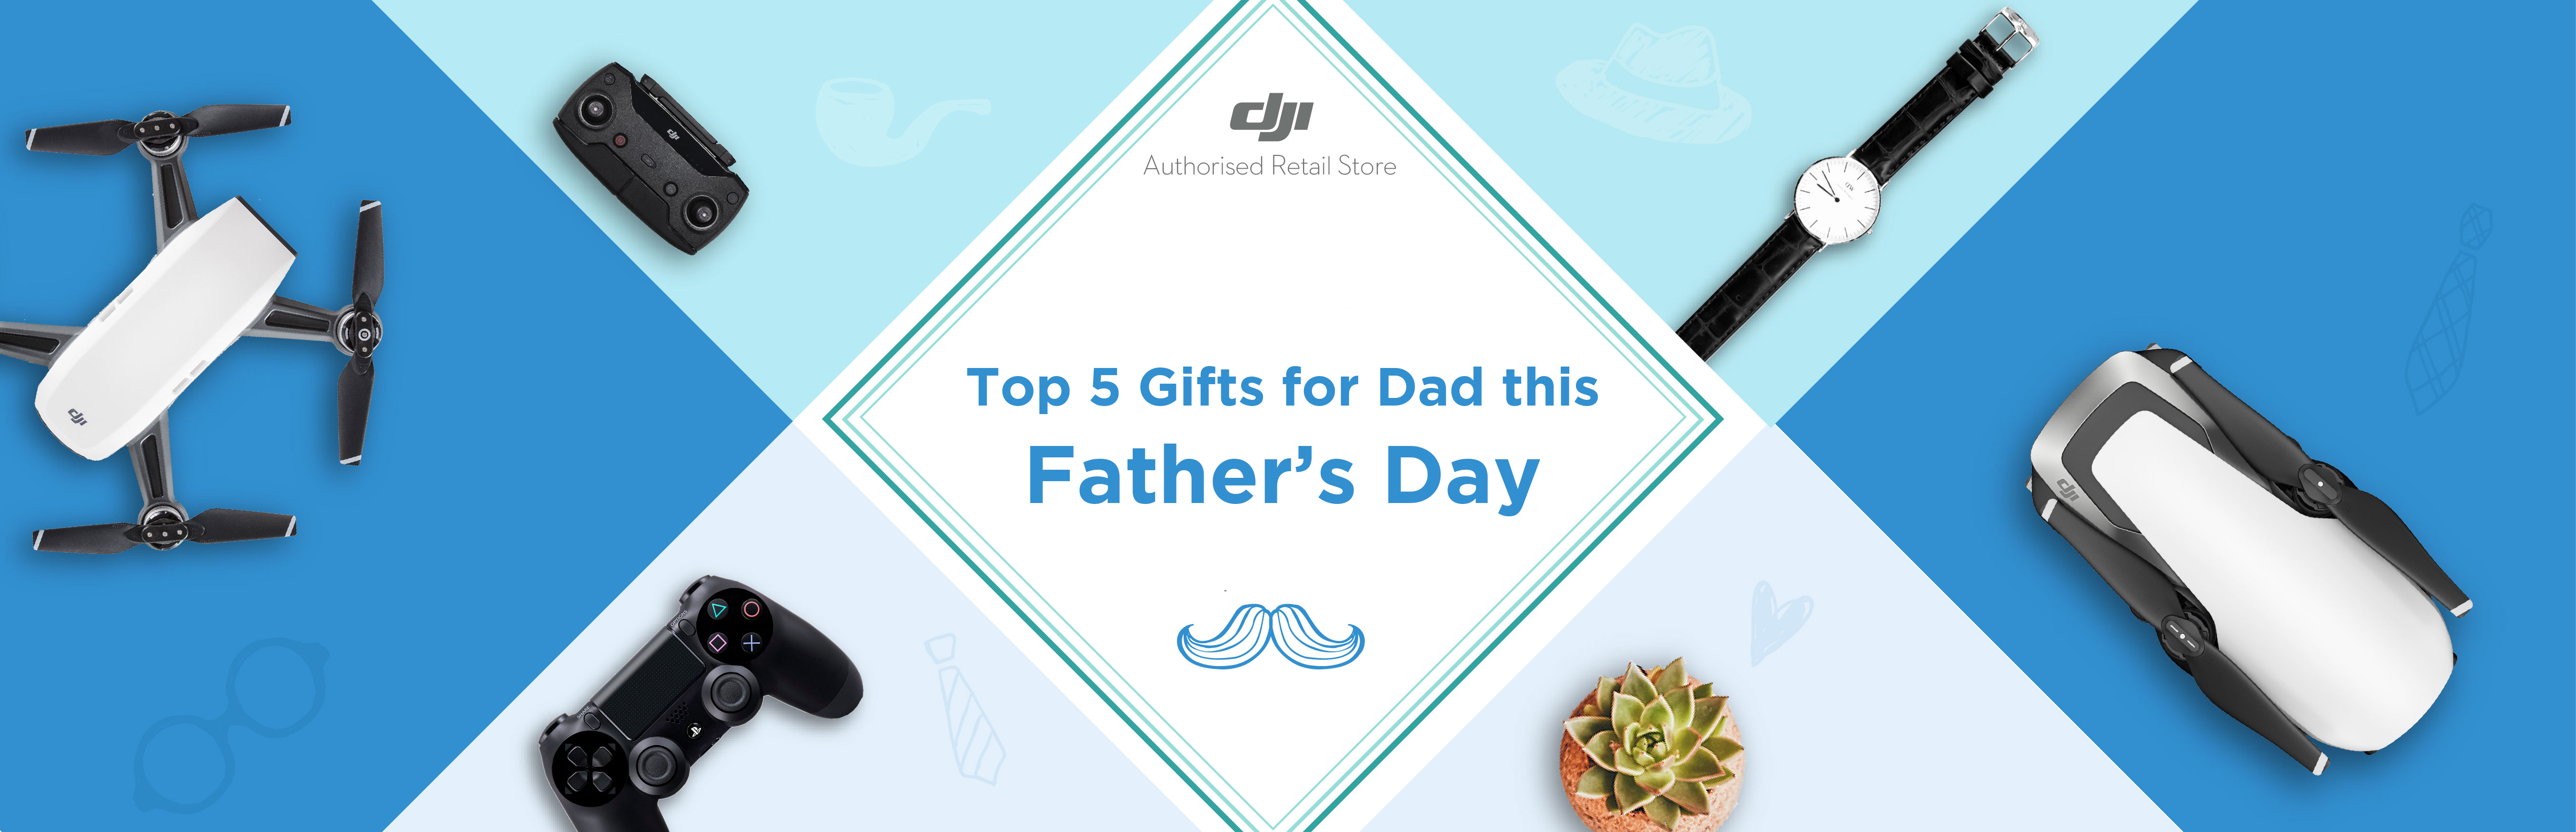 Top 5 gifts for dad this Father's day!